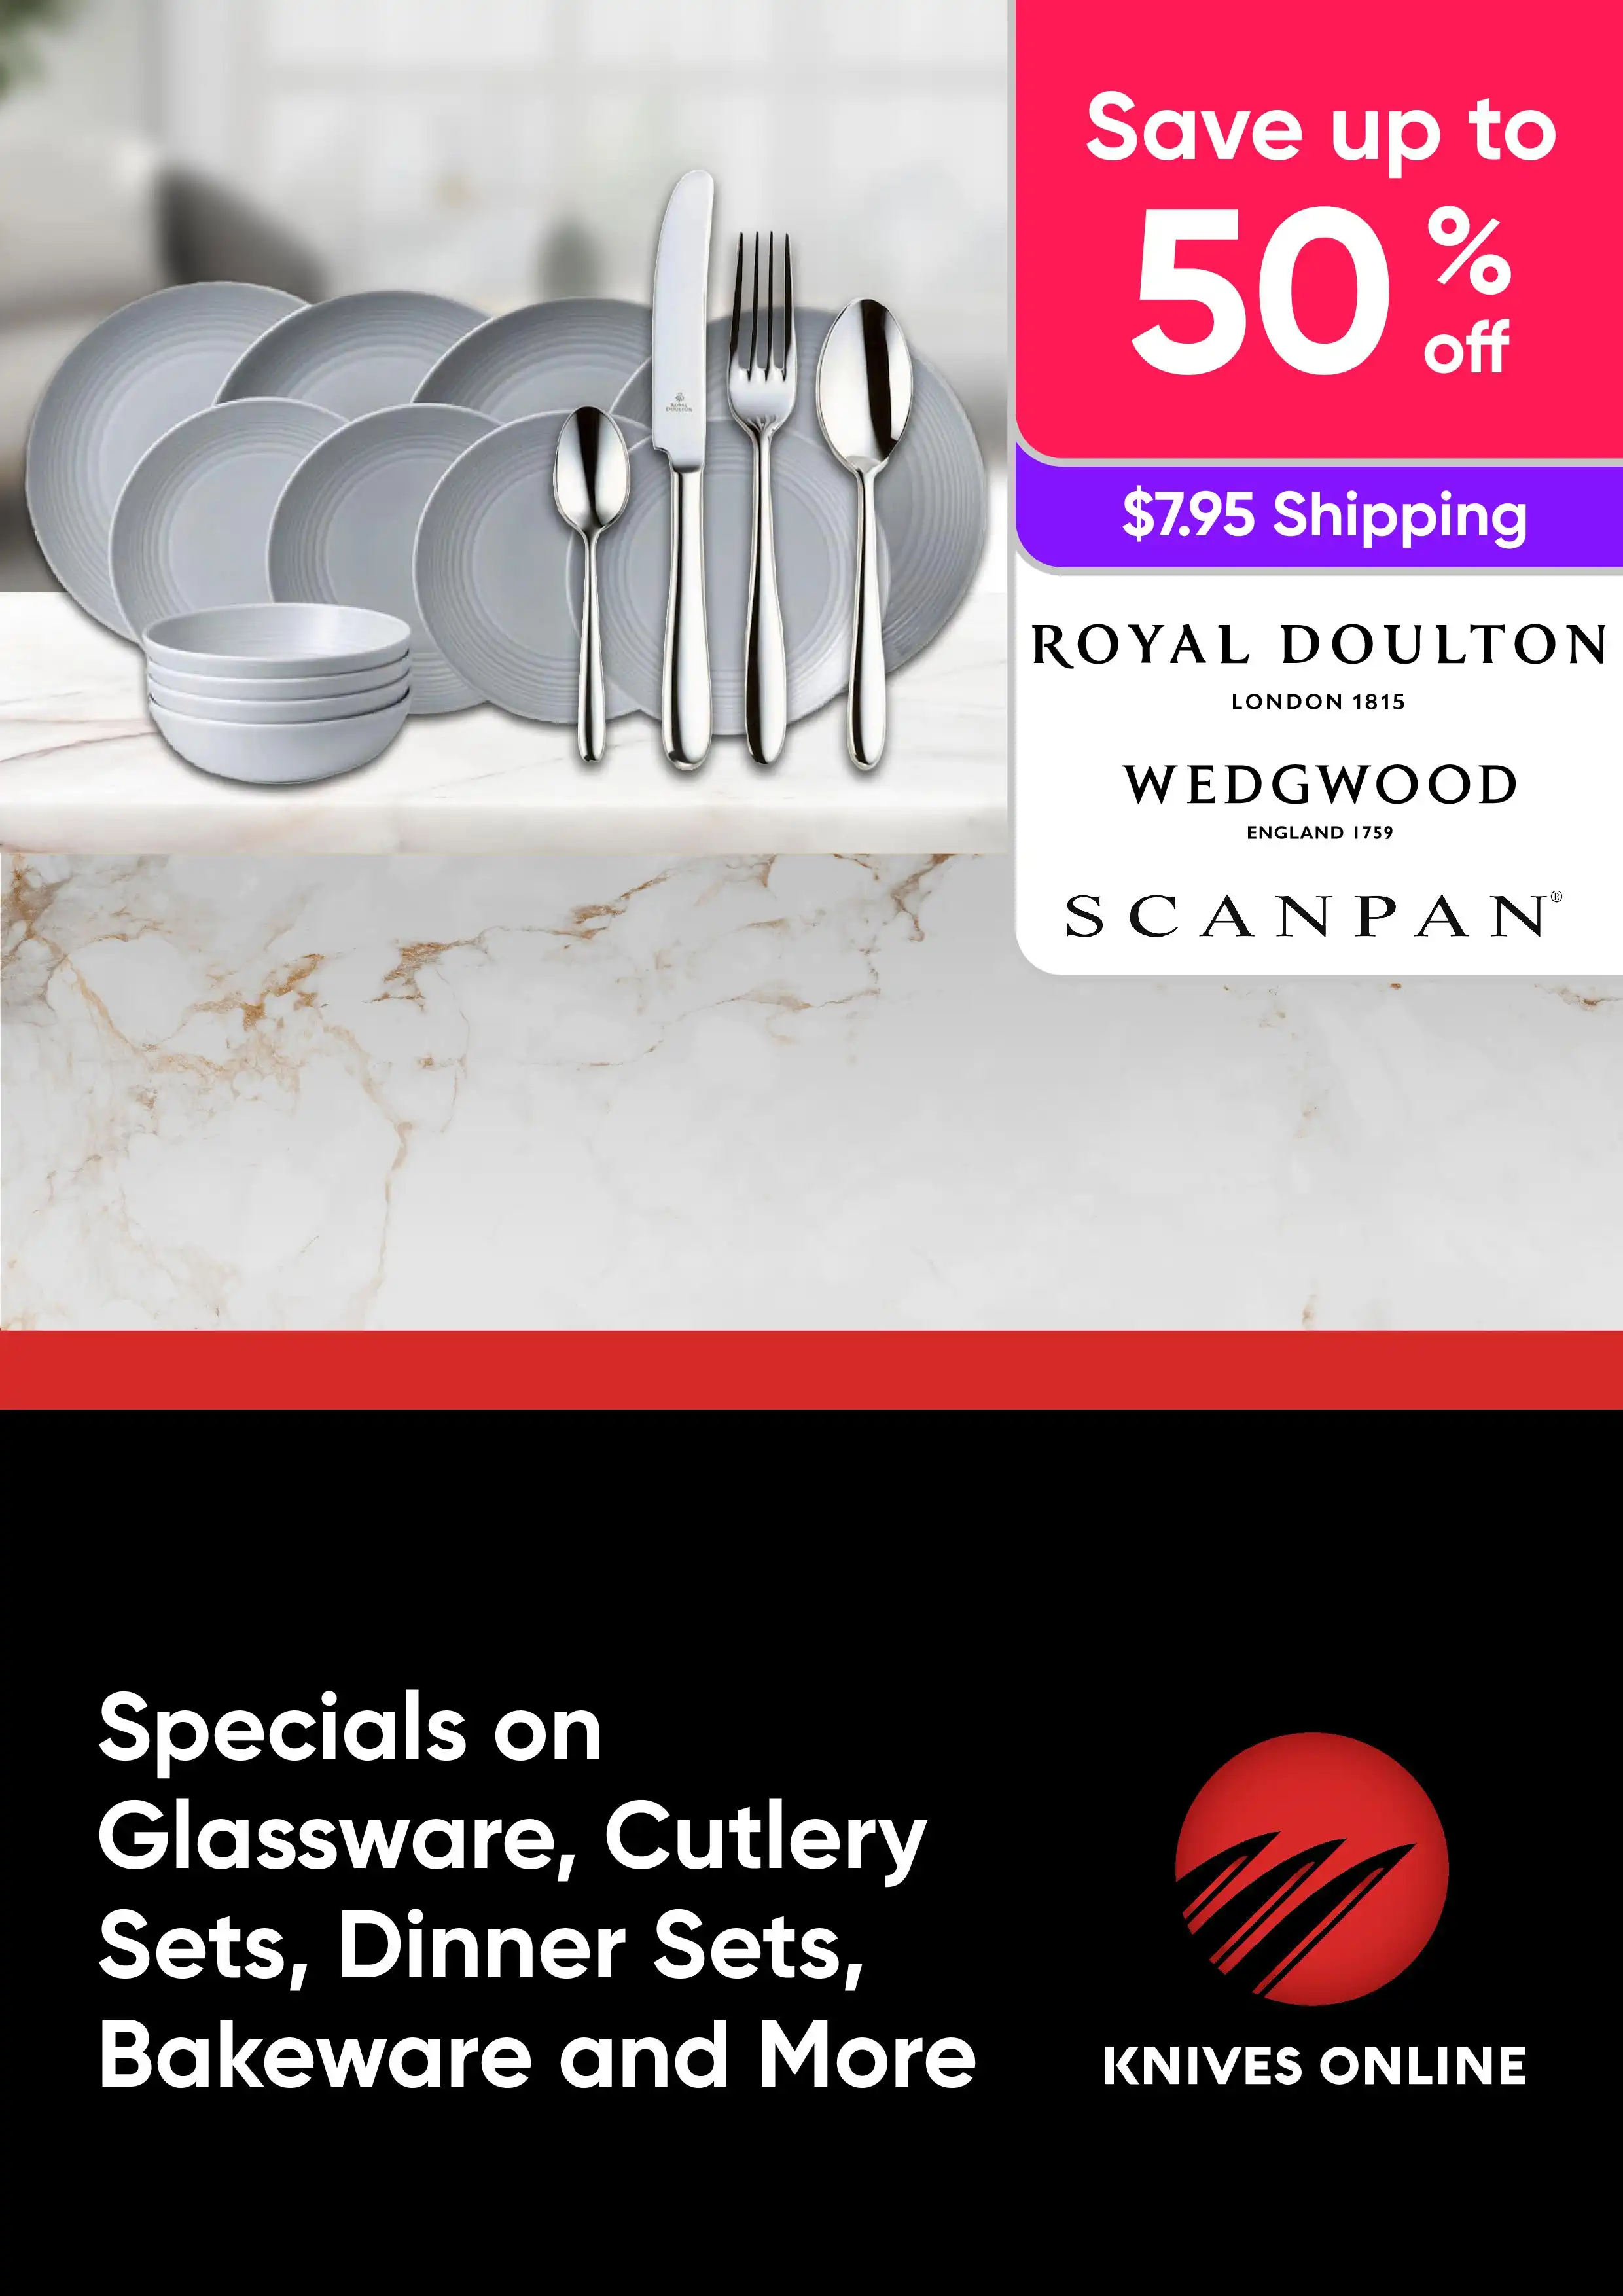 Specials on Glassware, Cutlery Sets, Dinner Sets and More - Royal Doulton, Wedgewood, Scanpan - Up to 50% off 